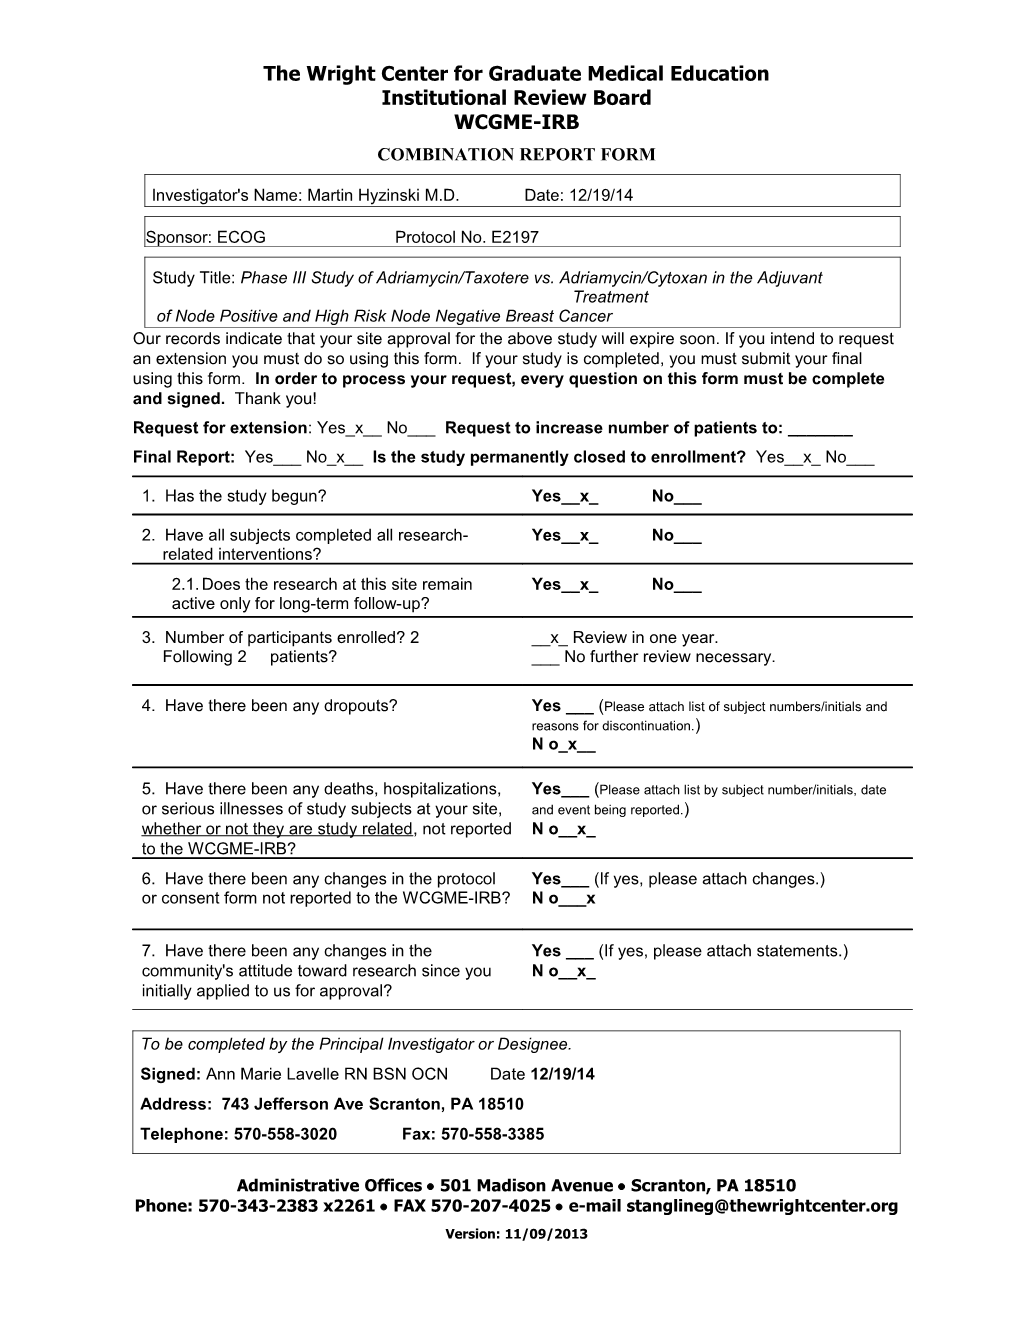 Combination Report Form